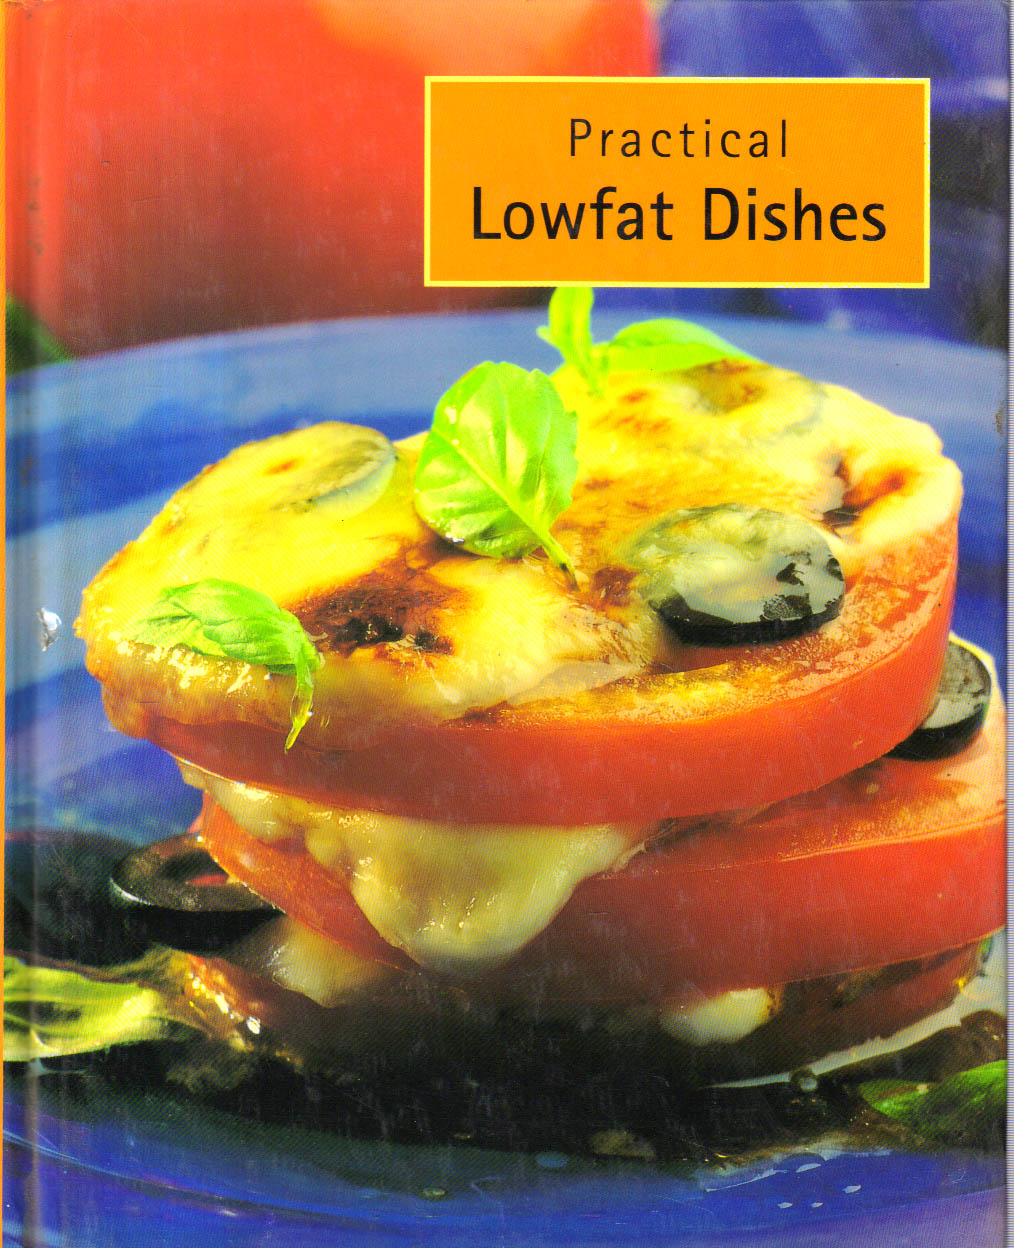 Practical Lowfat Dishes